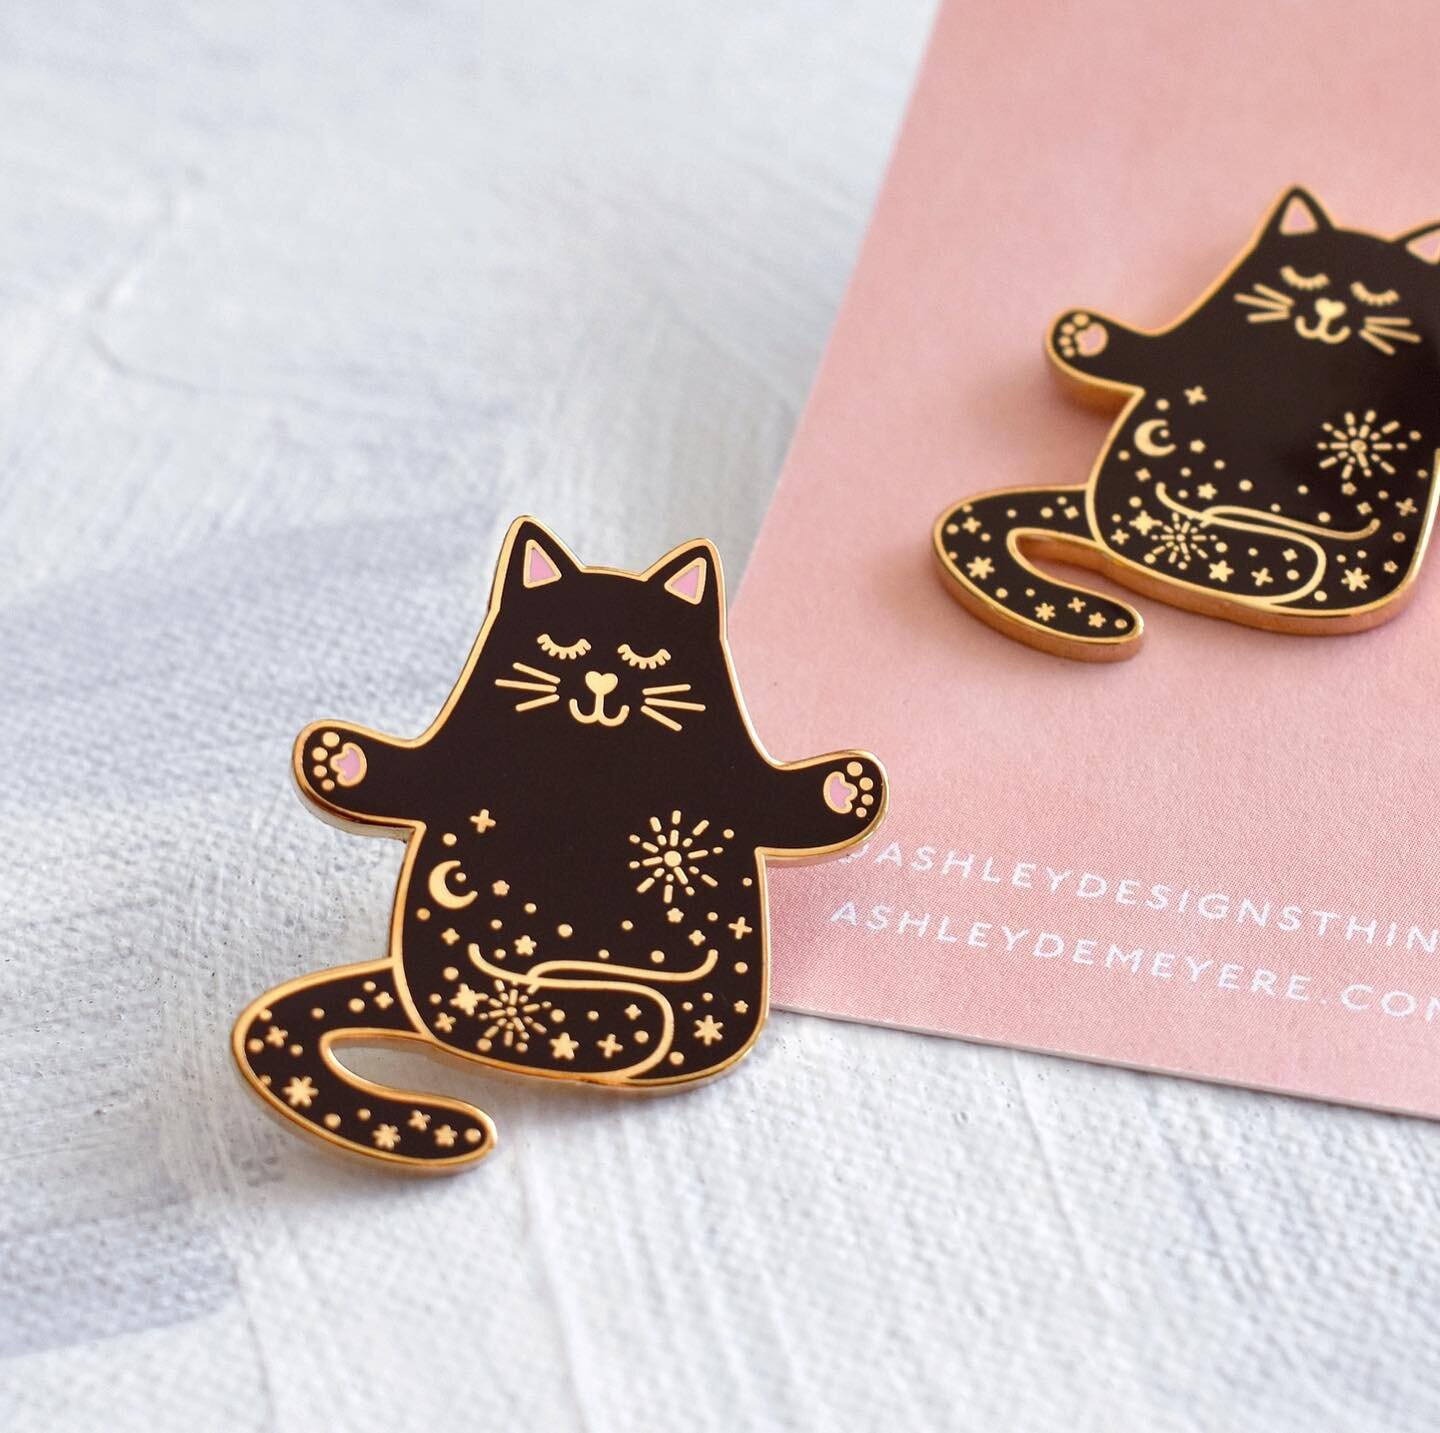 I come to you with pawsitive news (and no I will never stop using puns) ... this pin I sell on @etsy has already raised over $200 for the amazing and flooftacular @jinsbottlebabies. And that&rsquo;s only in 35 days!! It&rsquo;s a super easy way to he